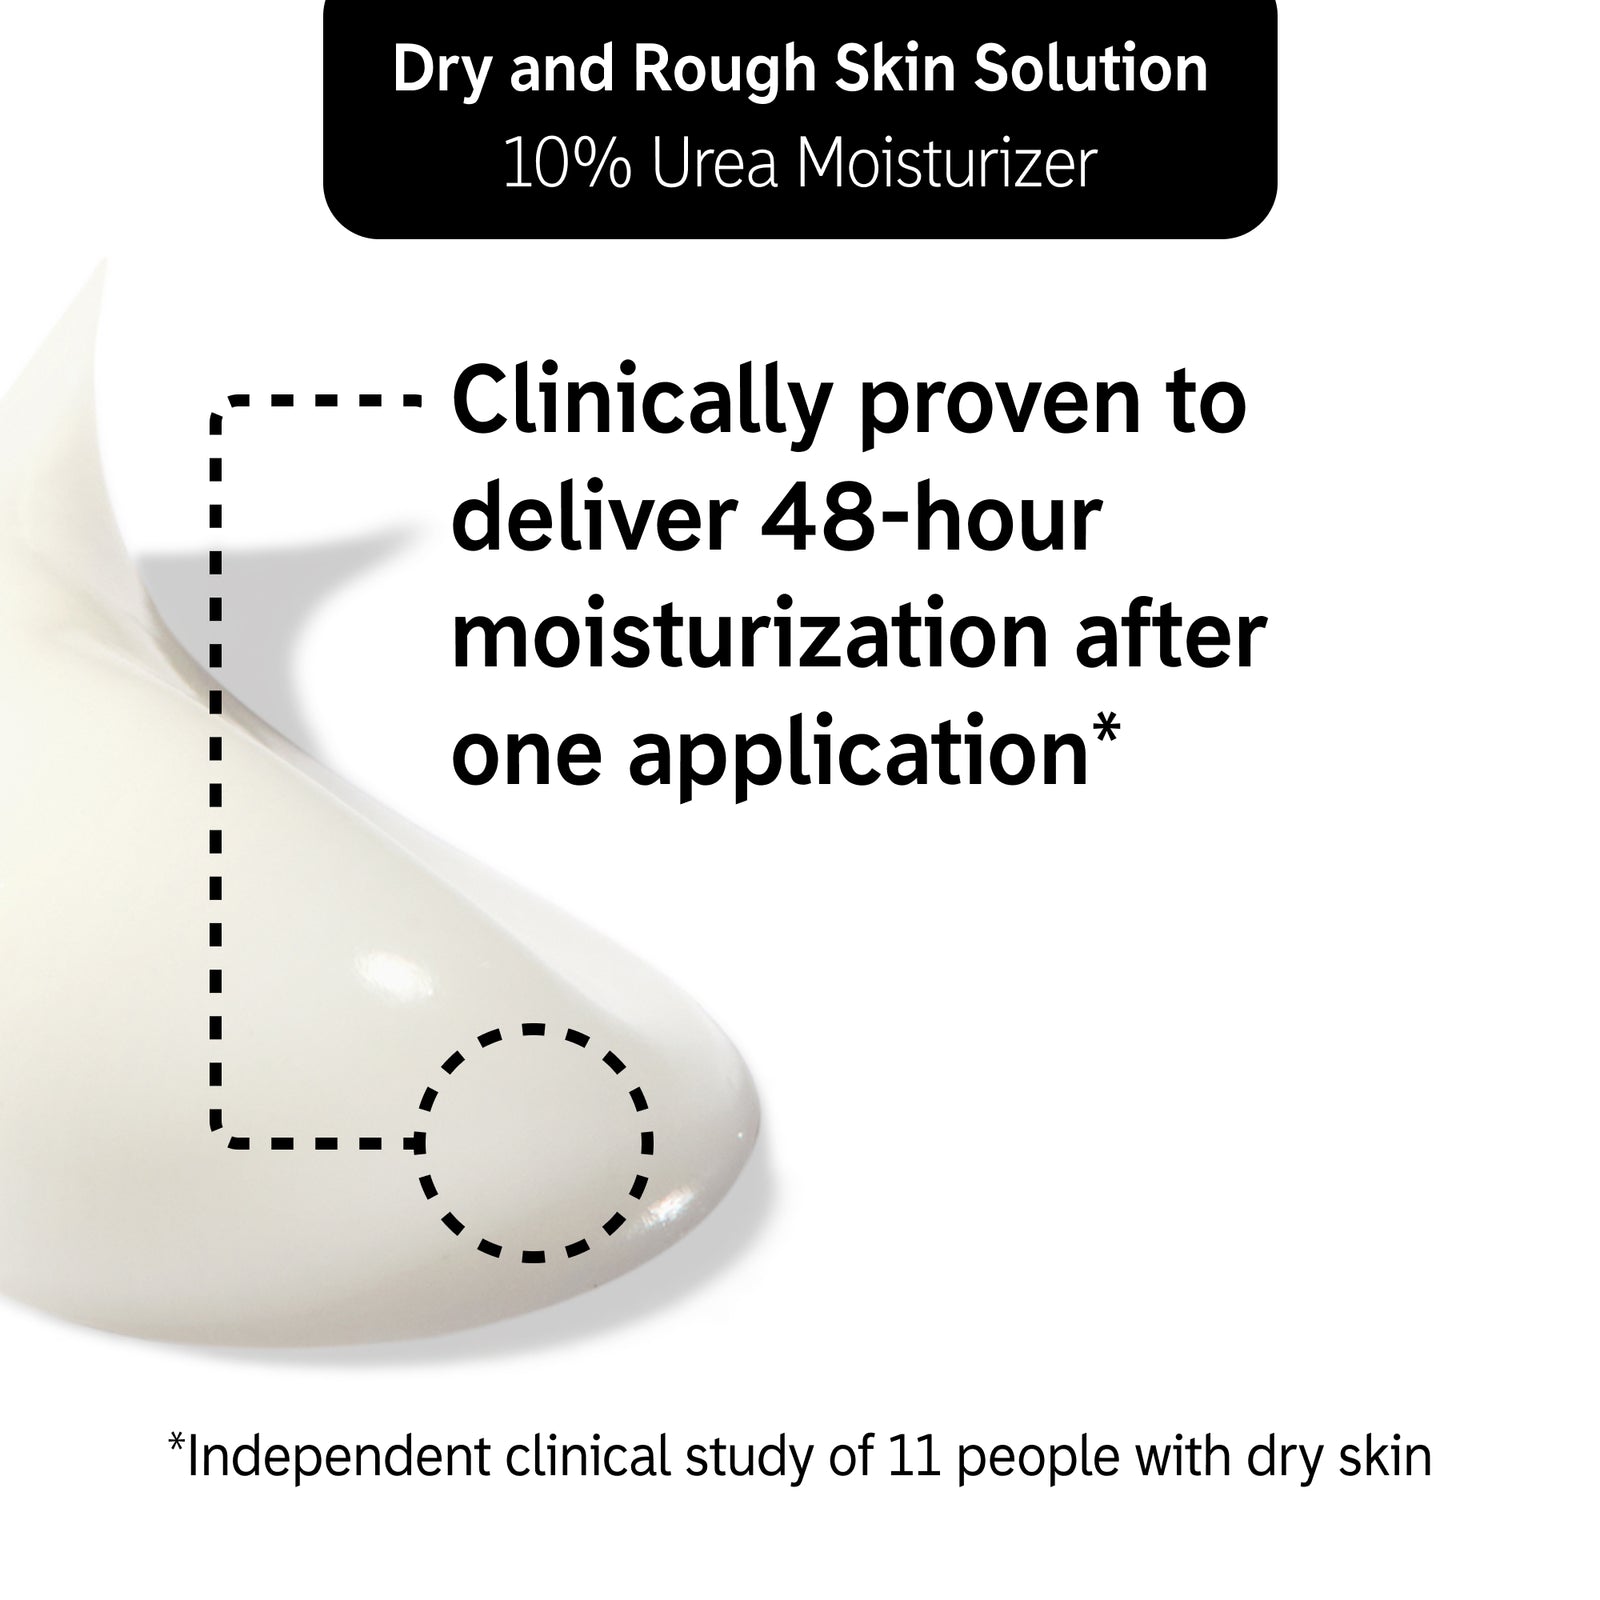 Key claim of clinical trial of Dry and Rough Skin Solution